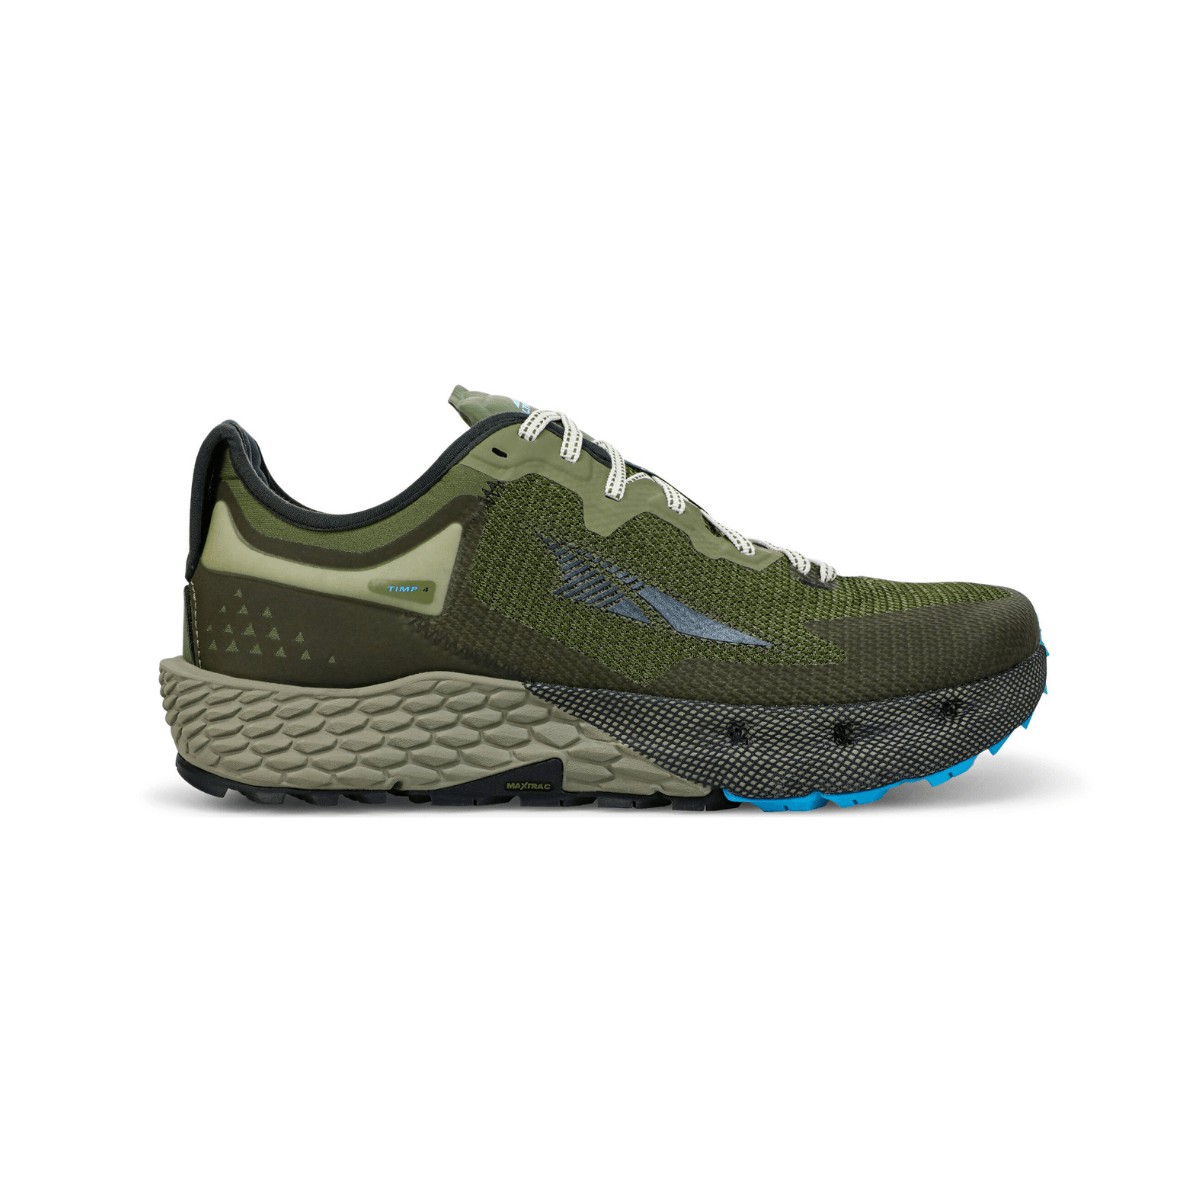 Chaussures Altra Timp 4 Olive Verte SS22, Taille 41 - EUR